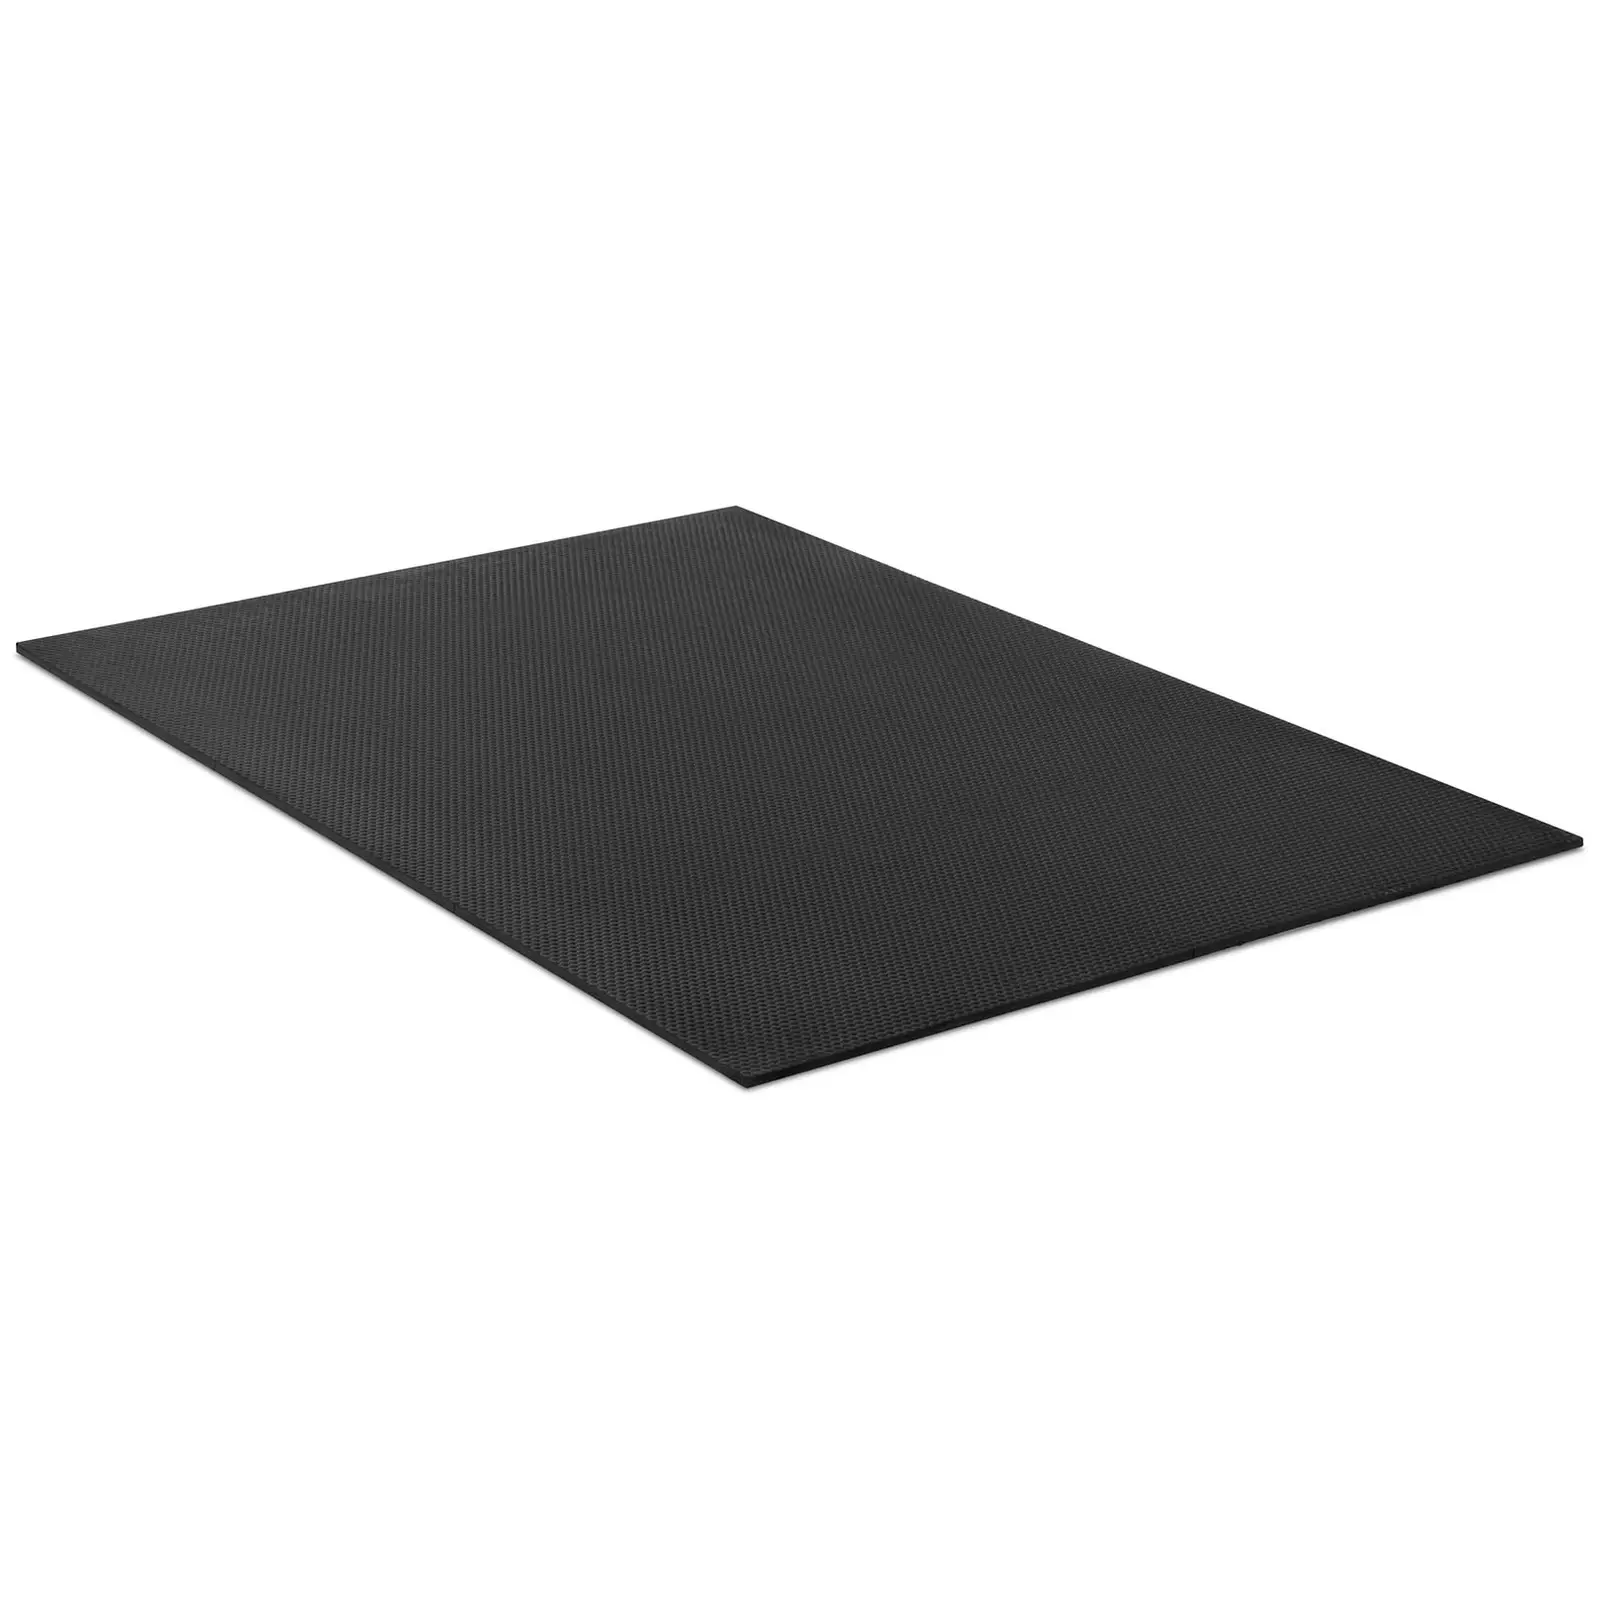 Stable Mats - set of 5 - with drainage grooves - 1830 x 1220 mm - 11.15 m²